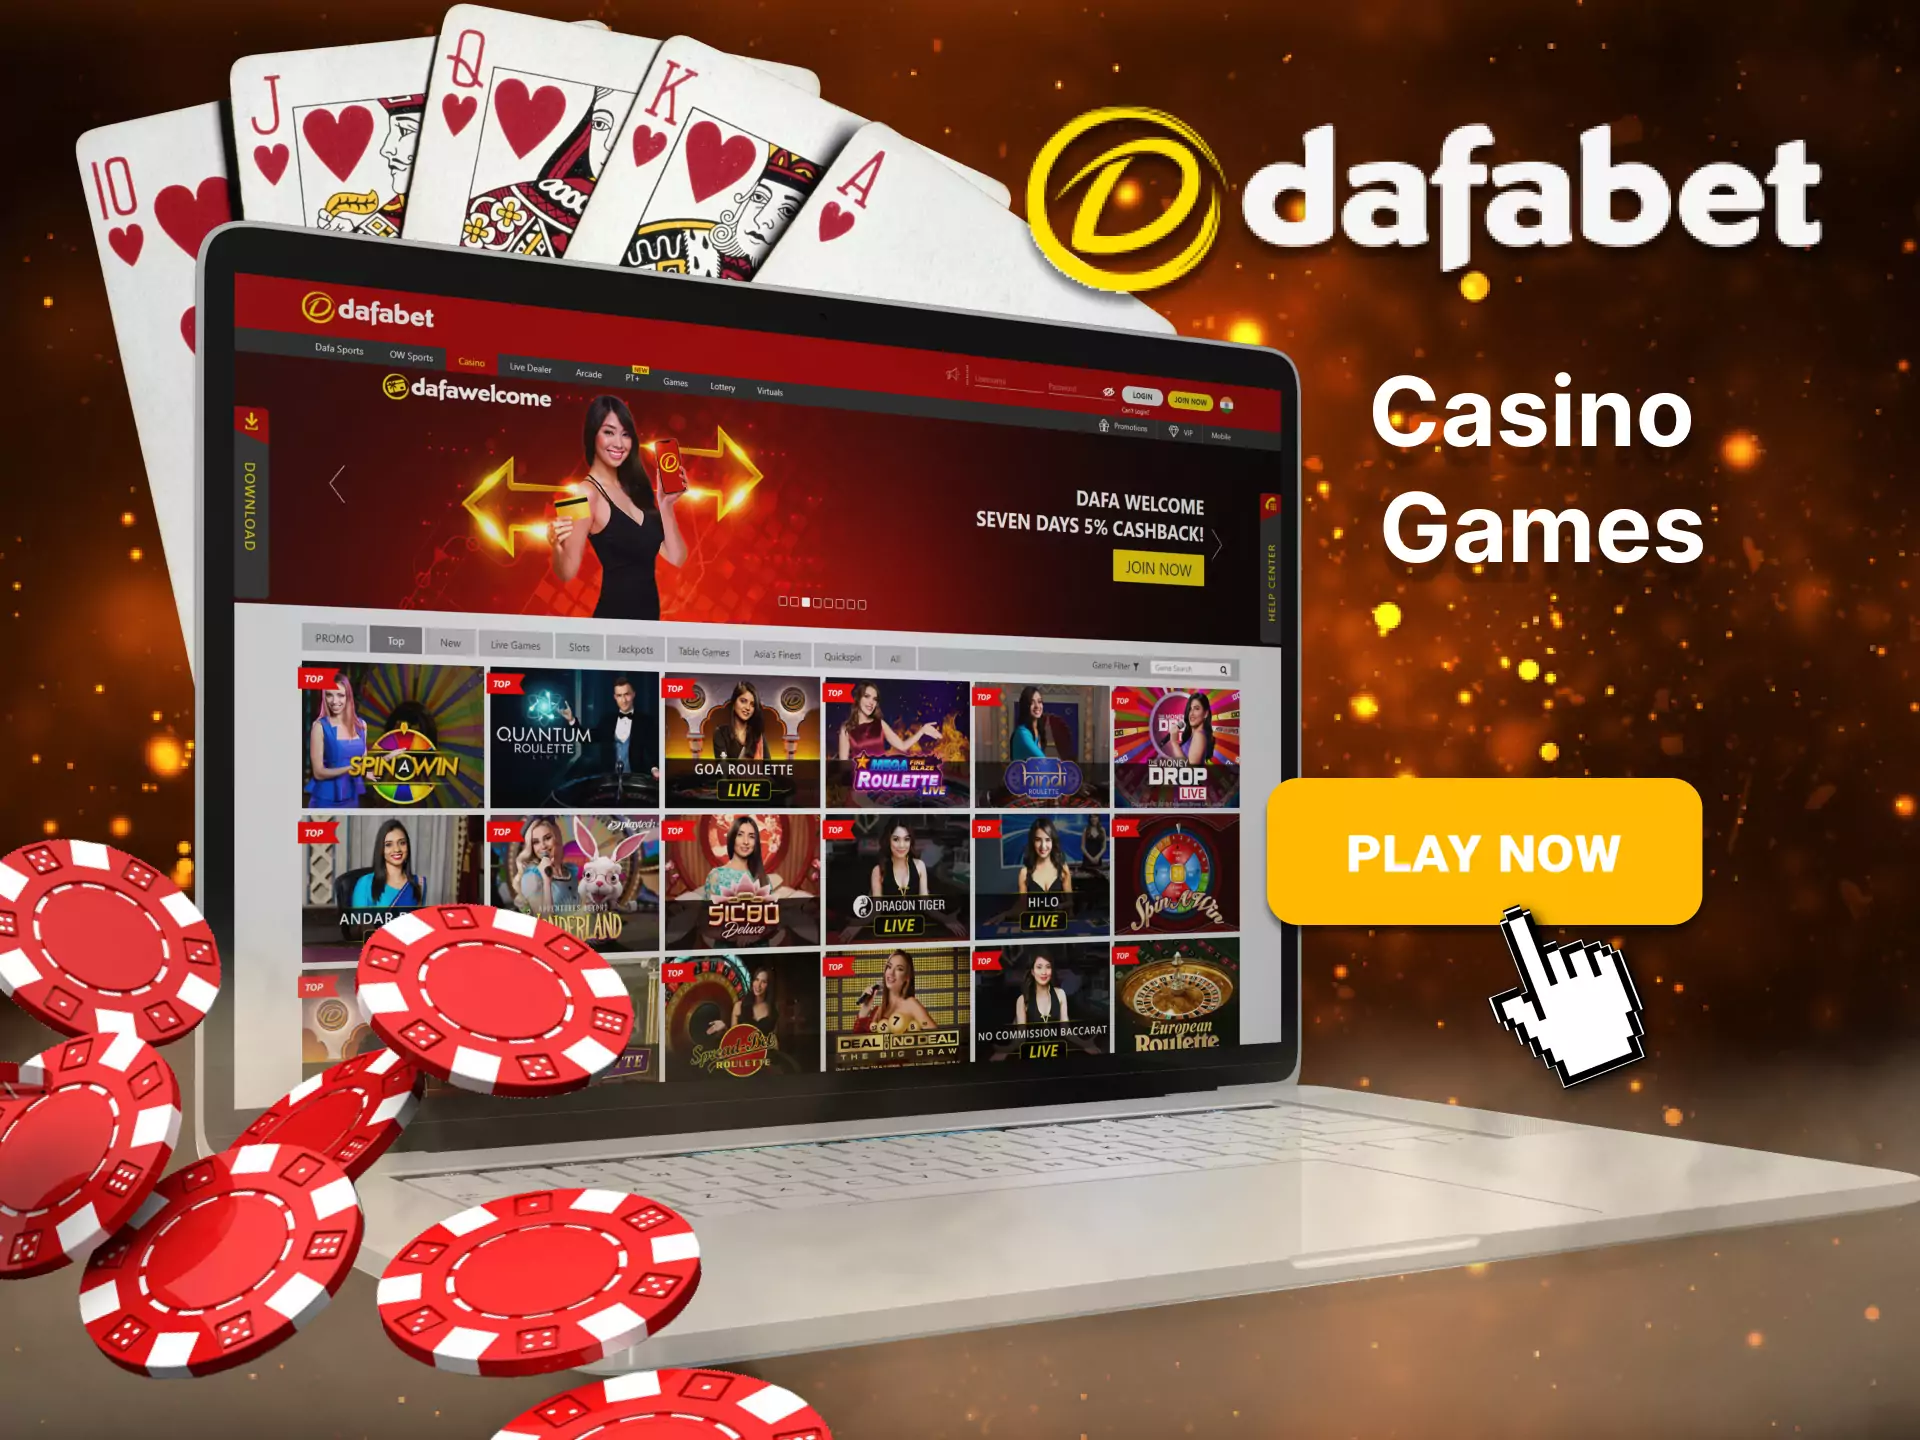 Dafabet has casino games for every taste, find your favorite.